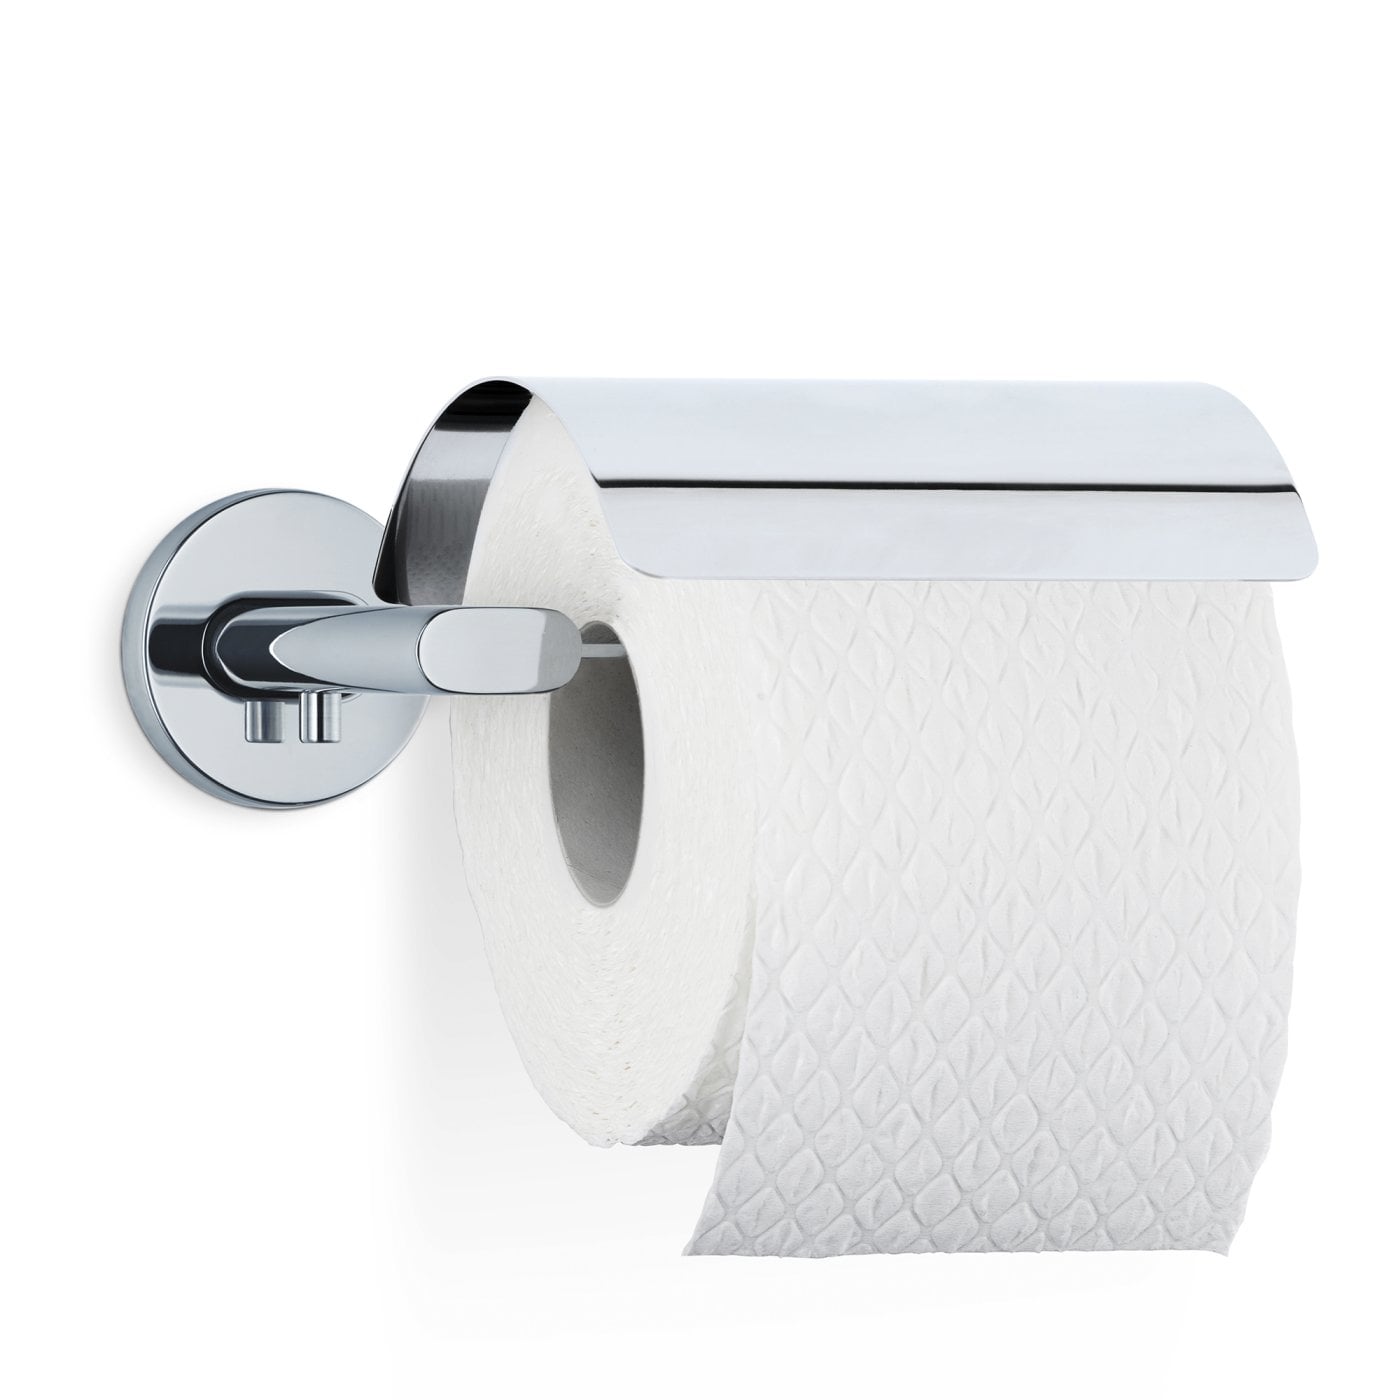 AREO Toilet Paper Holder polished *